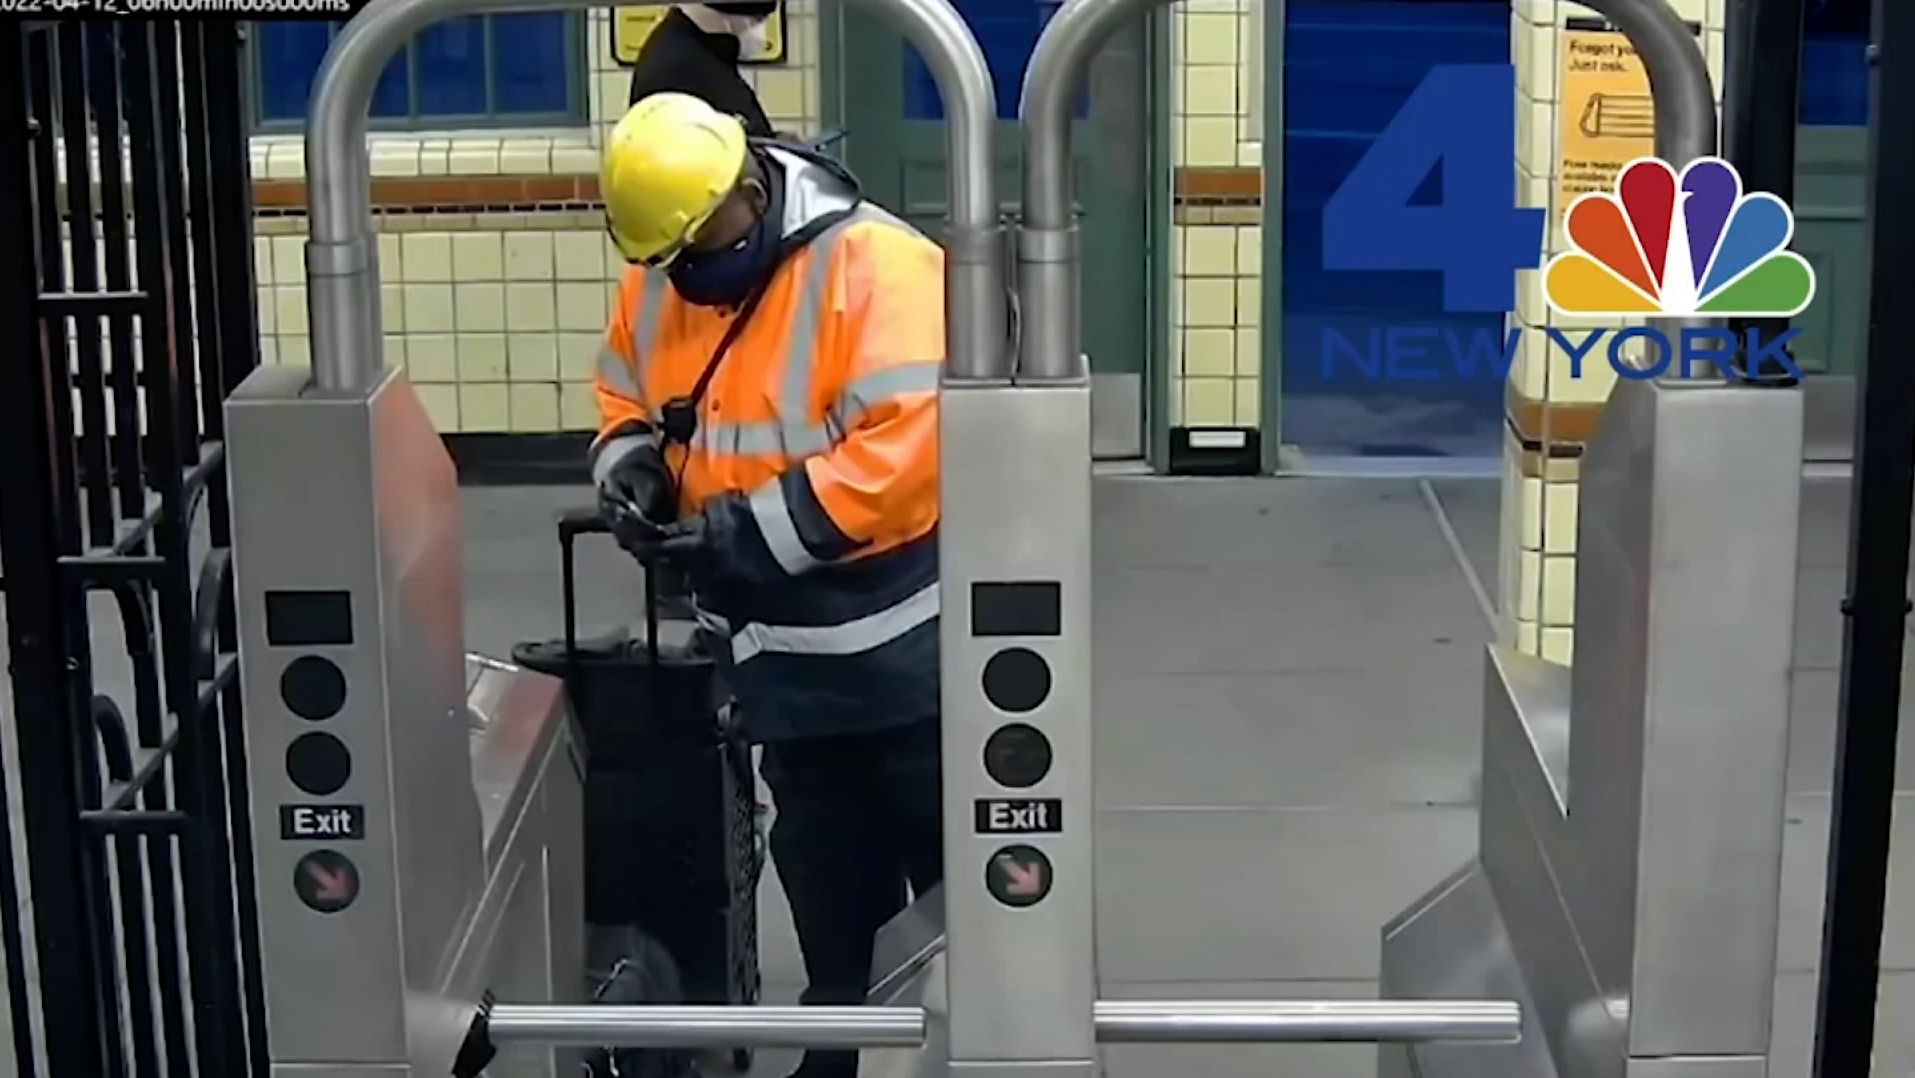 A frame grab from a video obtained by WNBC shows a man authorities believe to be Brooklyn subway shooting suspect Frank James entering New York City's subway system.